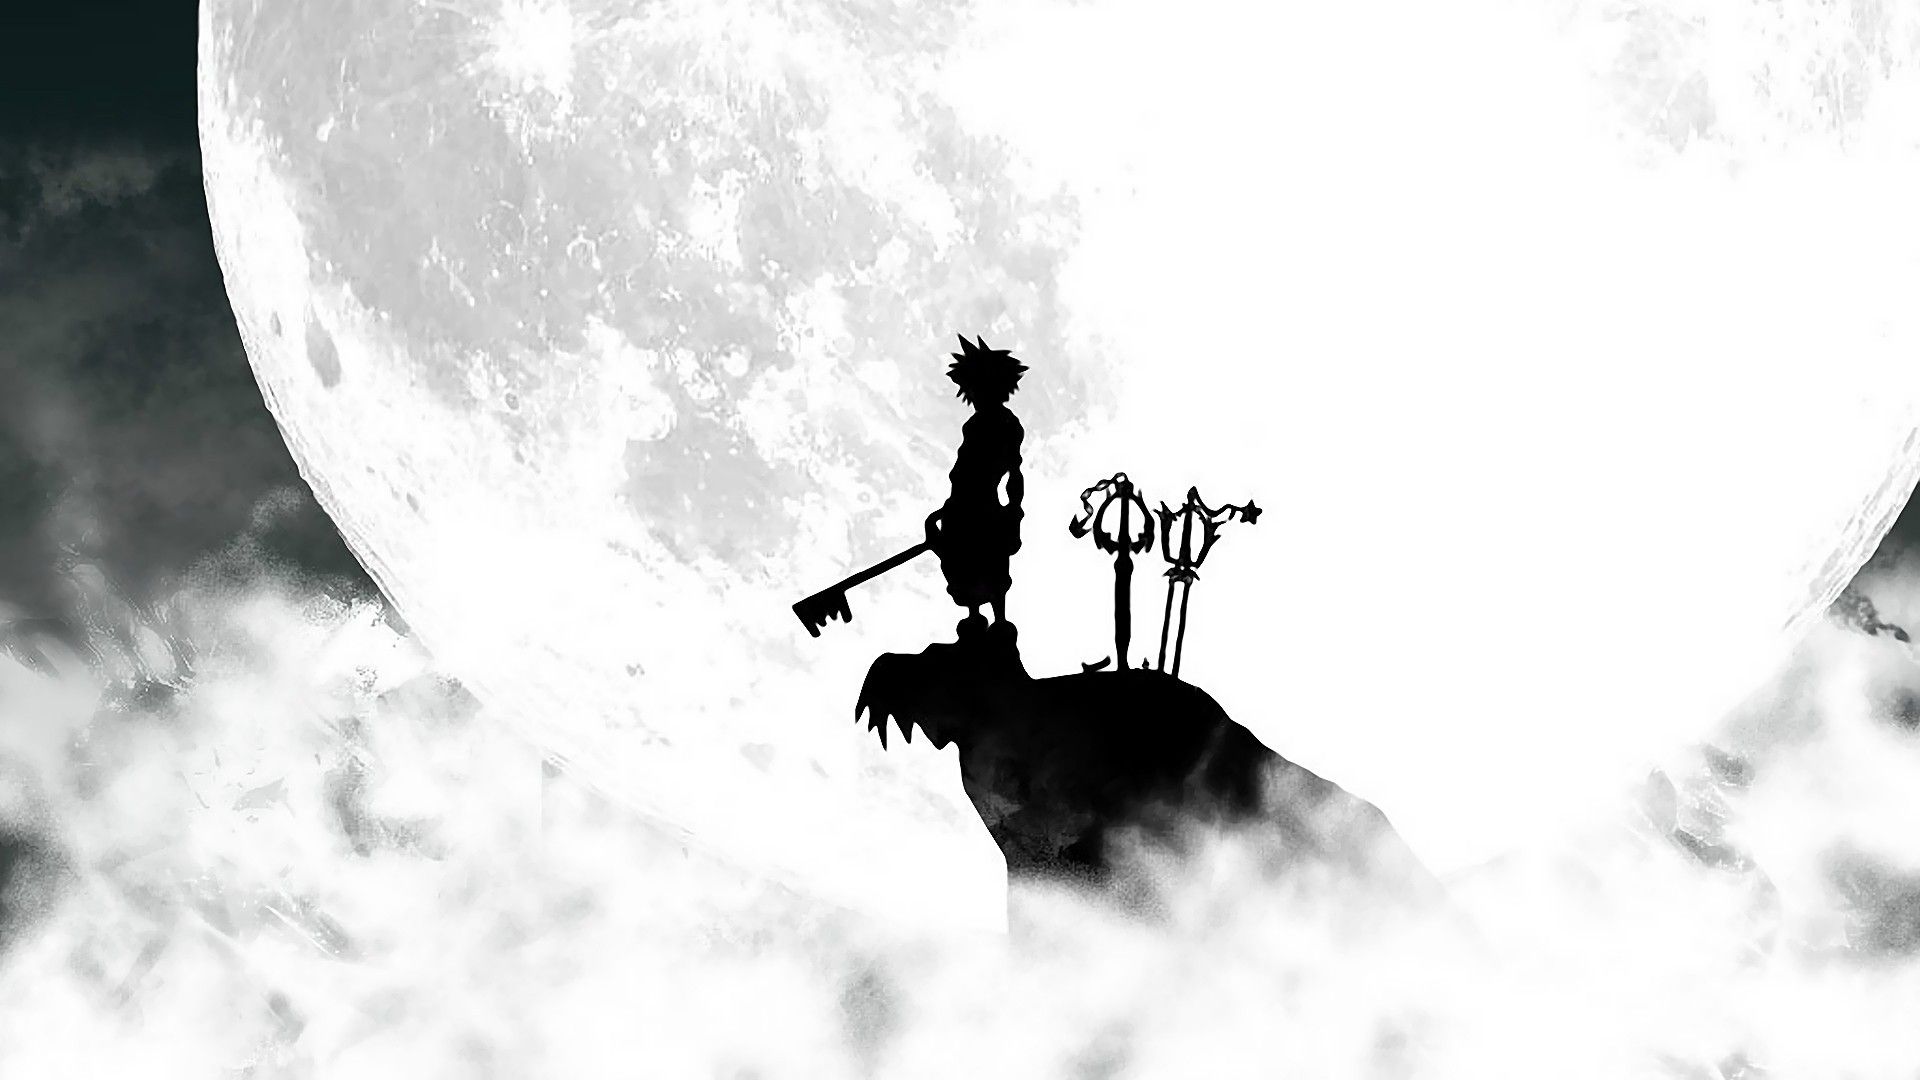 Wallpaper, video games, anime, silhouette, Kingdom Hearts, black and white, monochrome photography 1920x1080